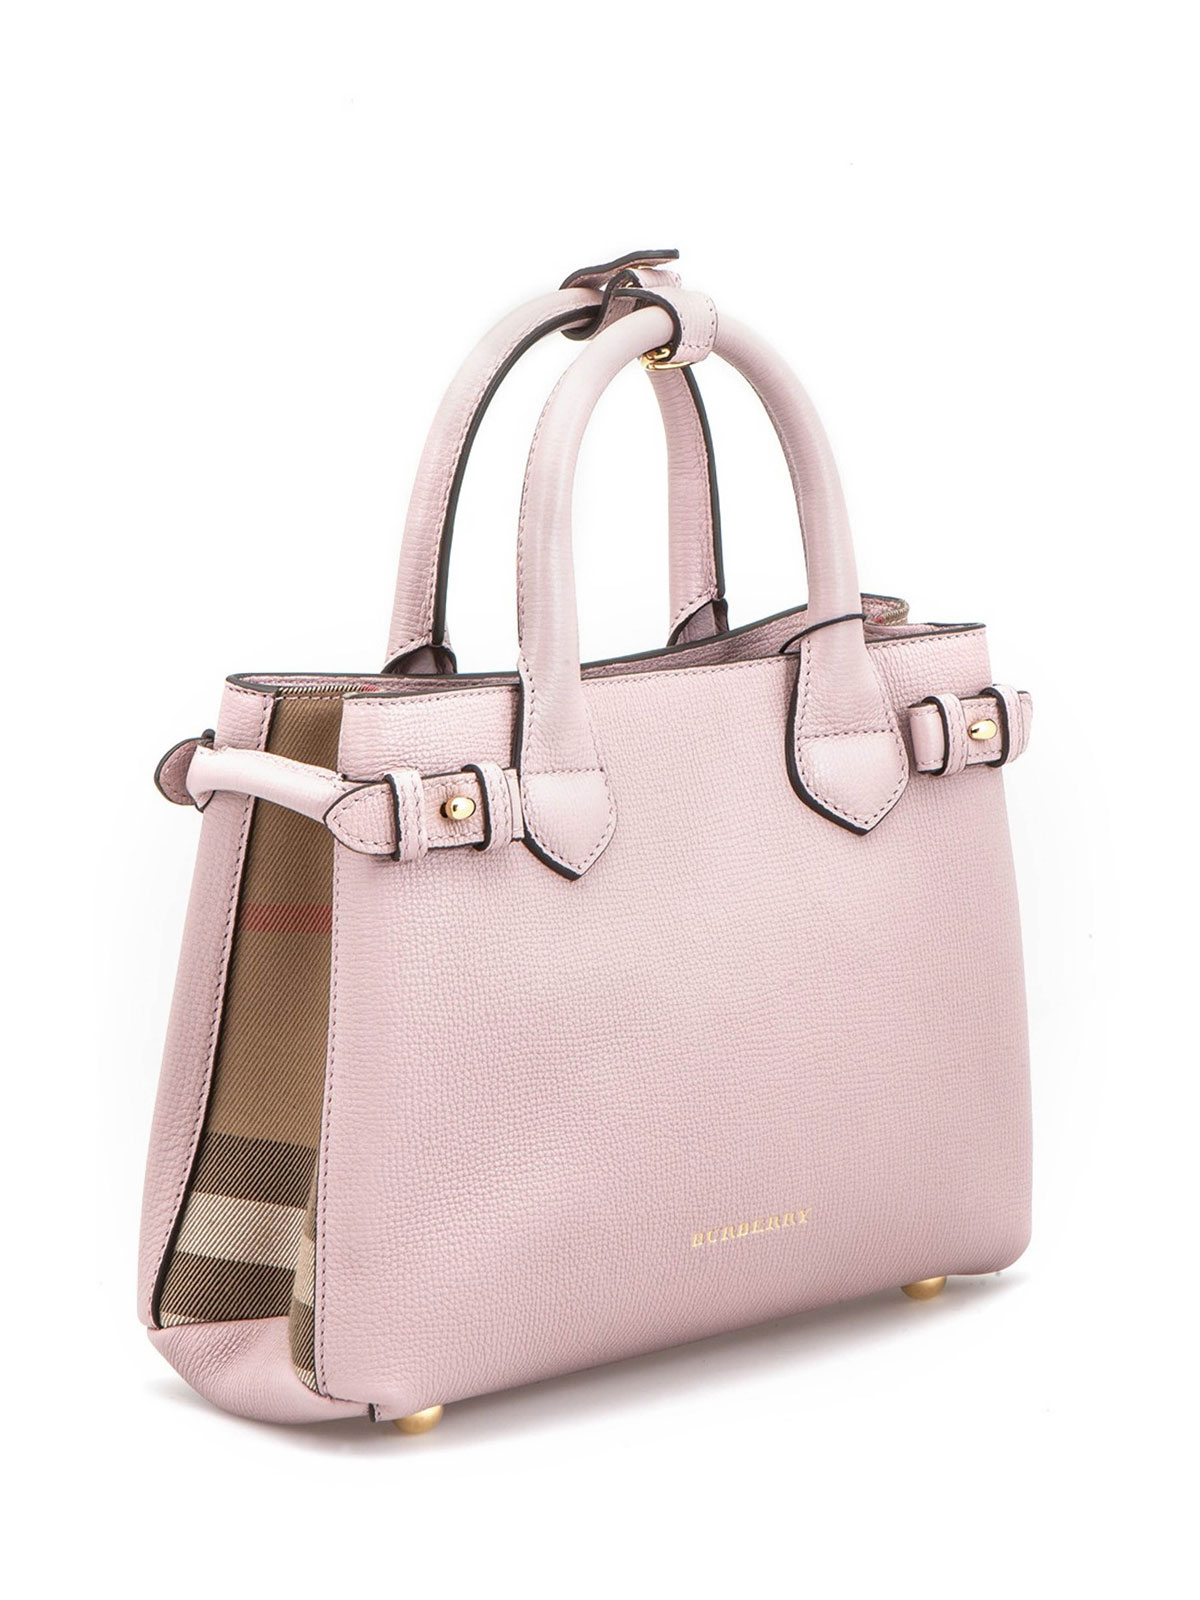 Burberry Baby Banner Bag in Pink